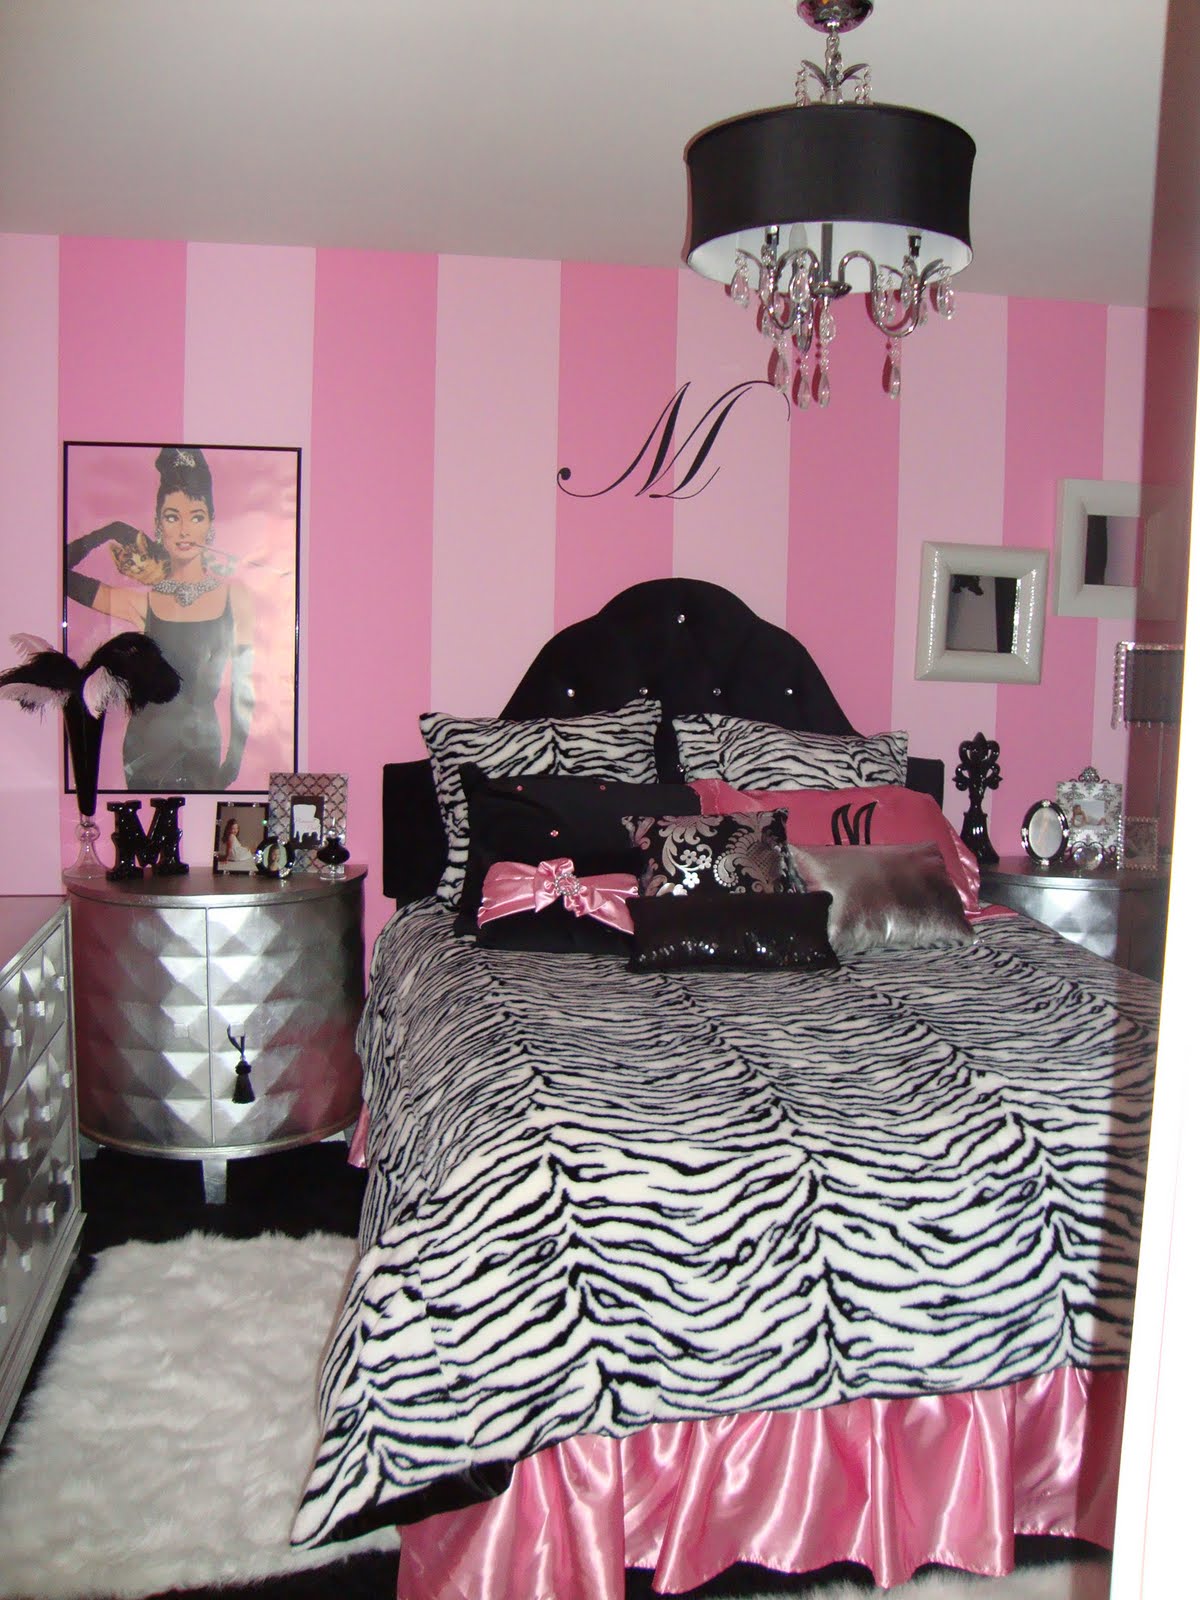 Hollywood Glamour Bedroom - Design Dazzle